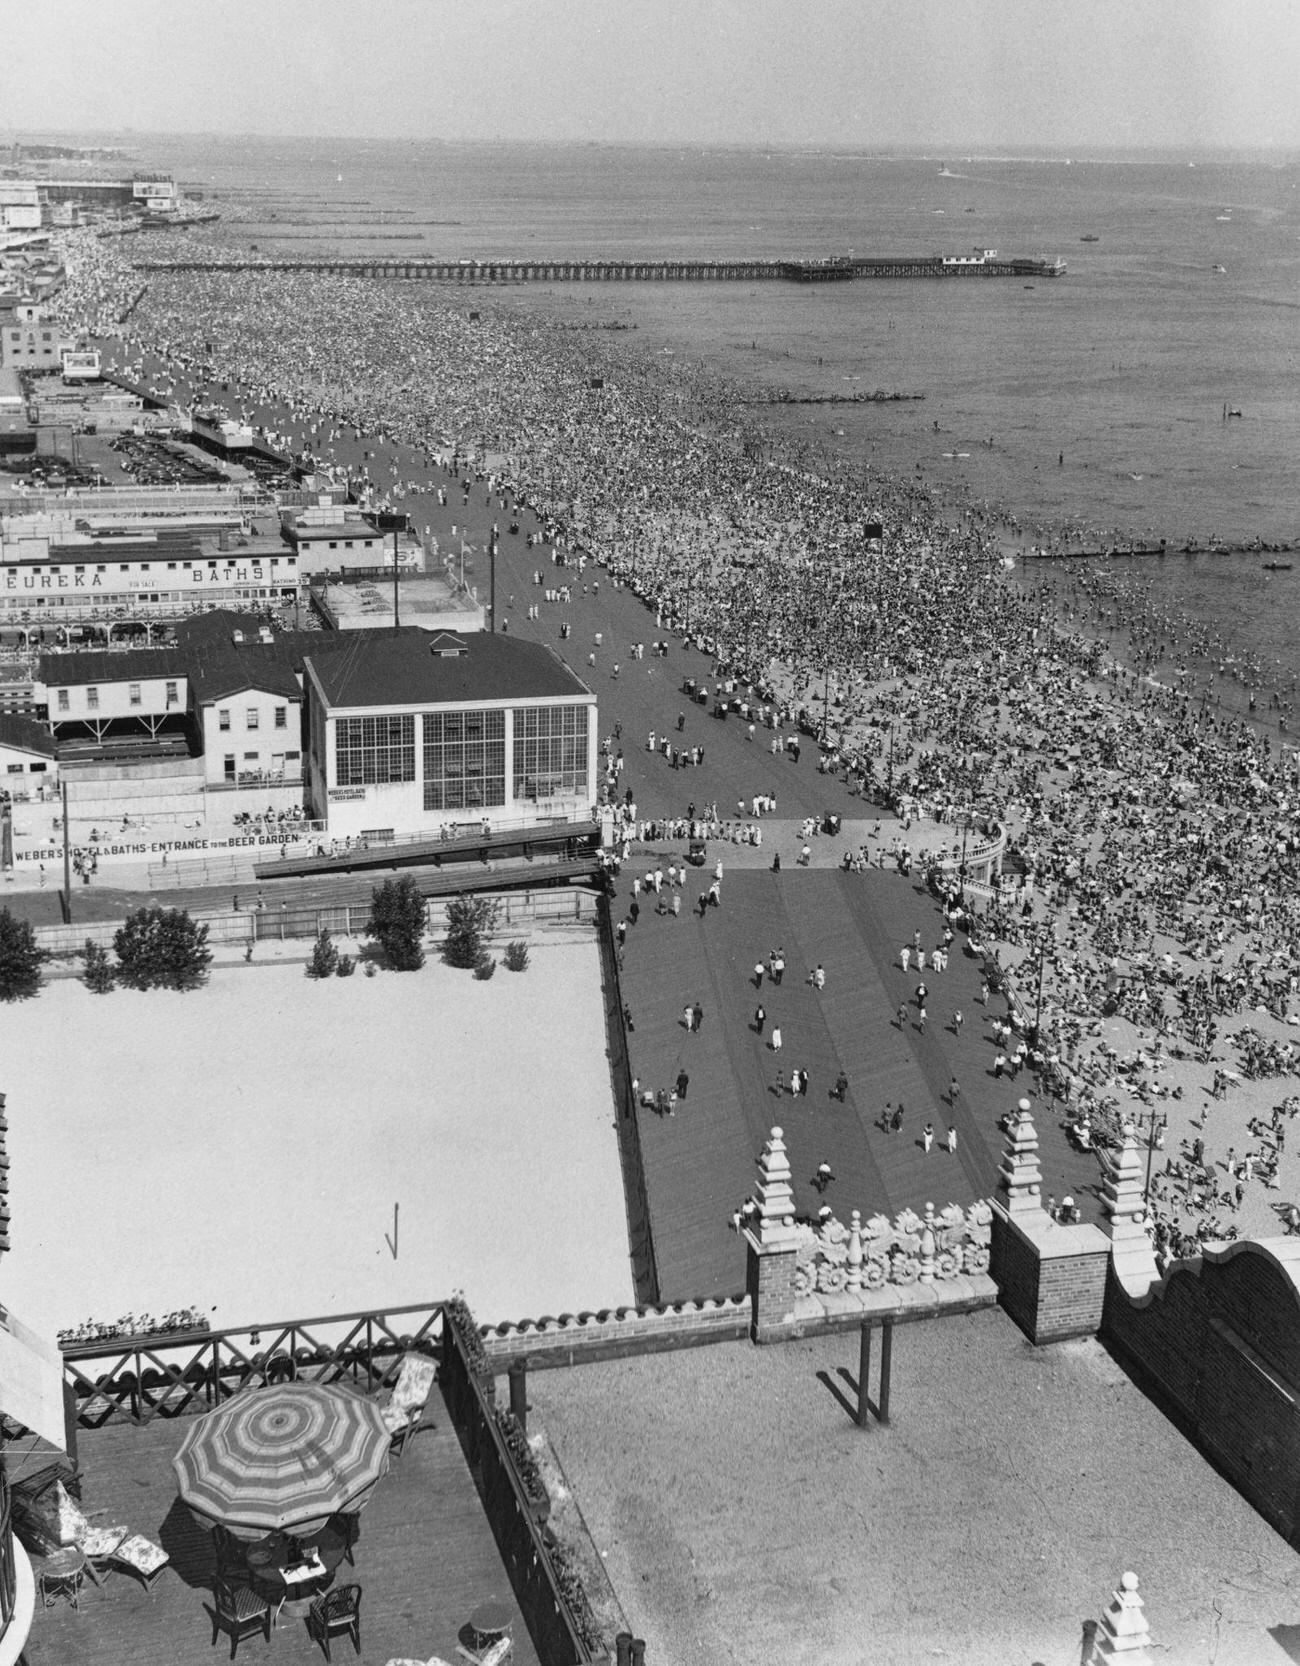 Large Crowd Visits Coney Island On July 4, 1934